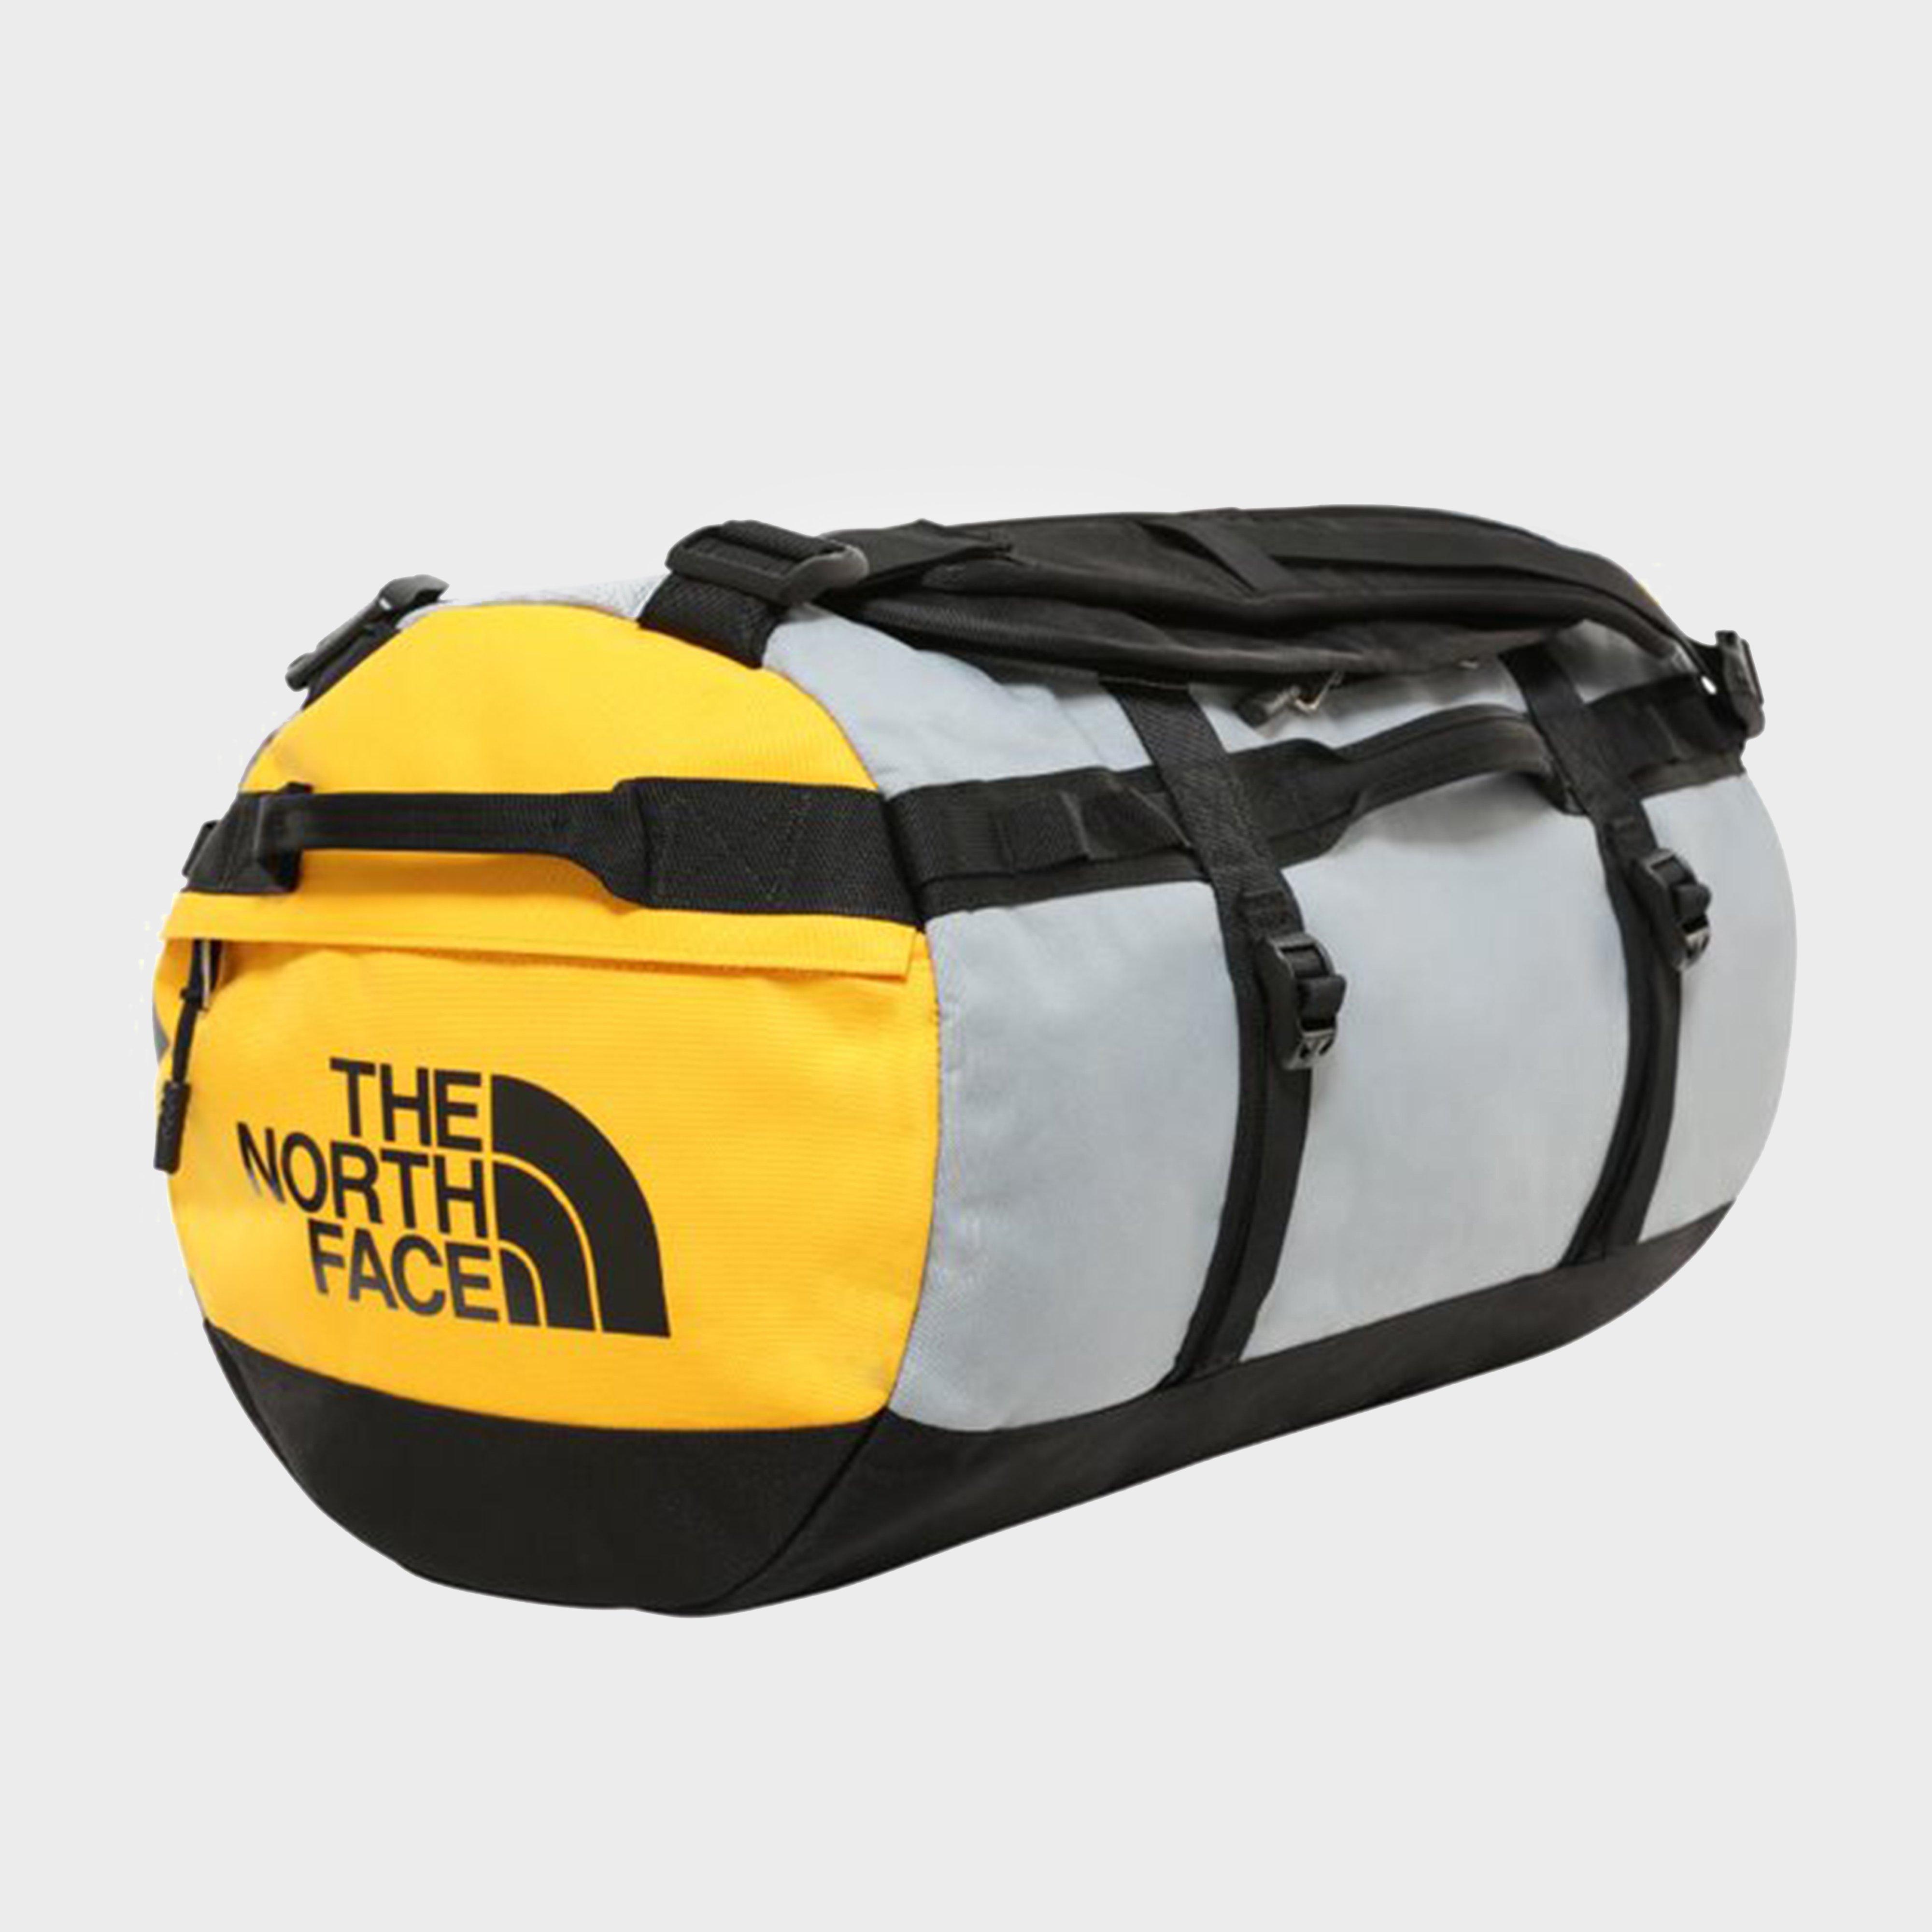  The North Face Gilman Duffel Bag (Small)